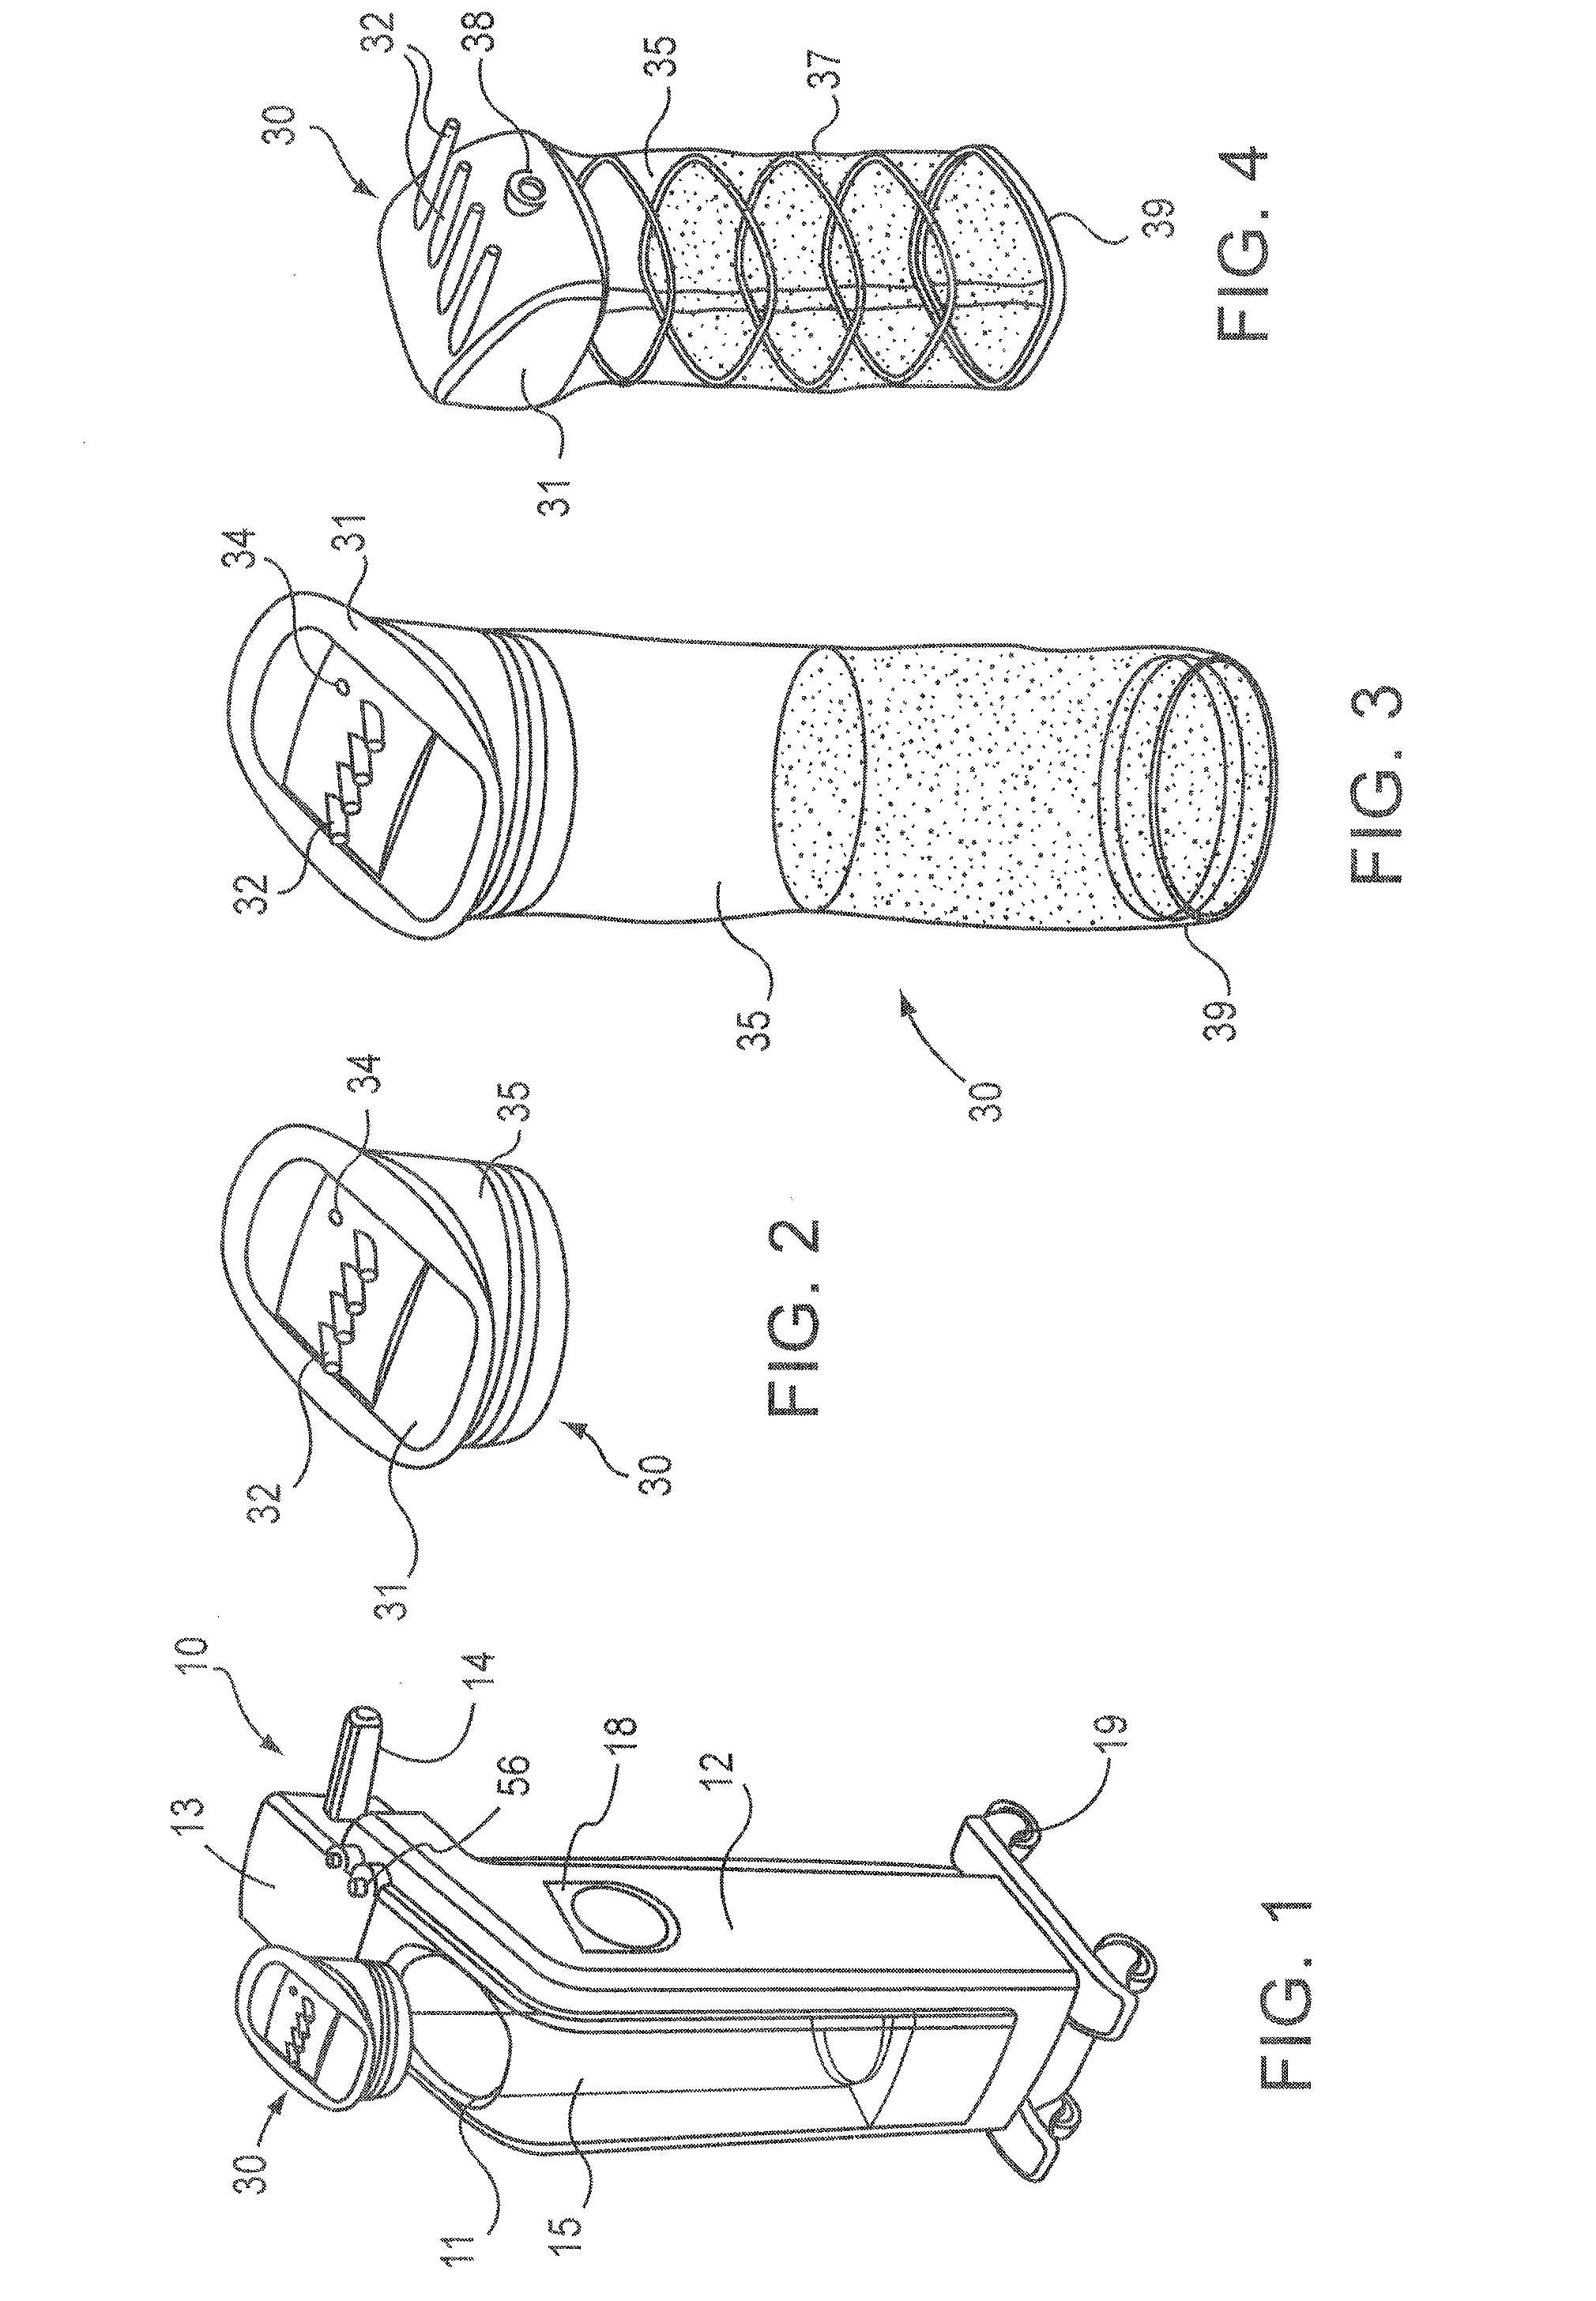 Fluid collection and disposal system and related methods